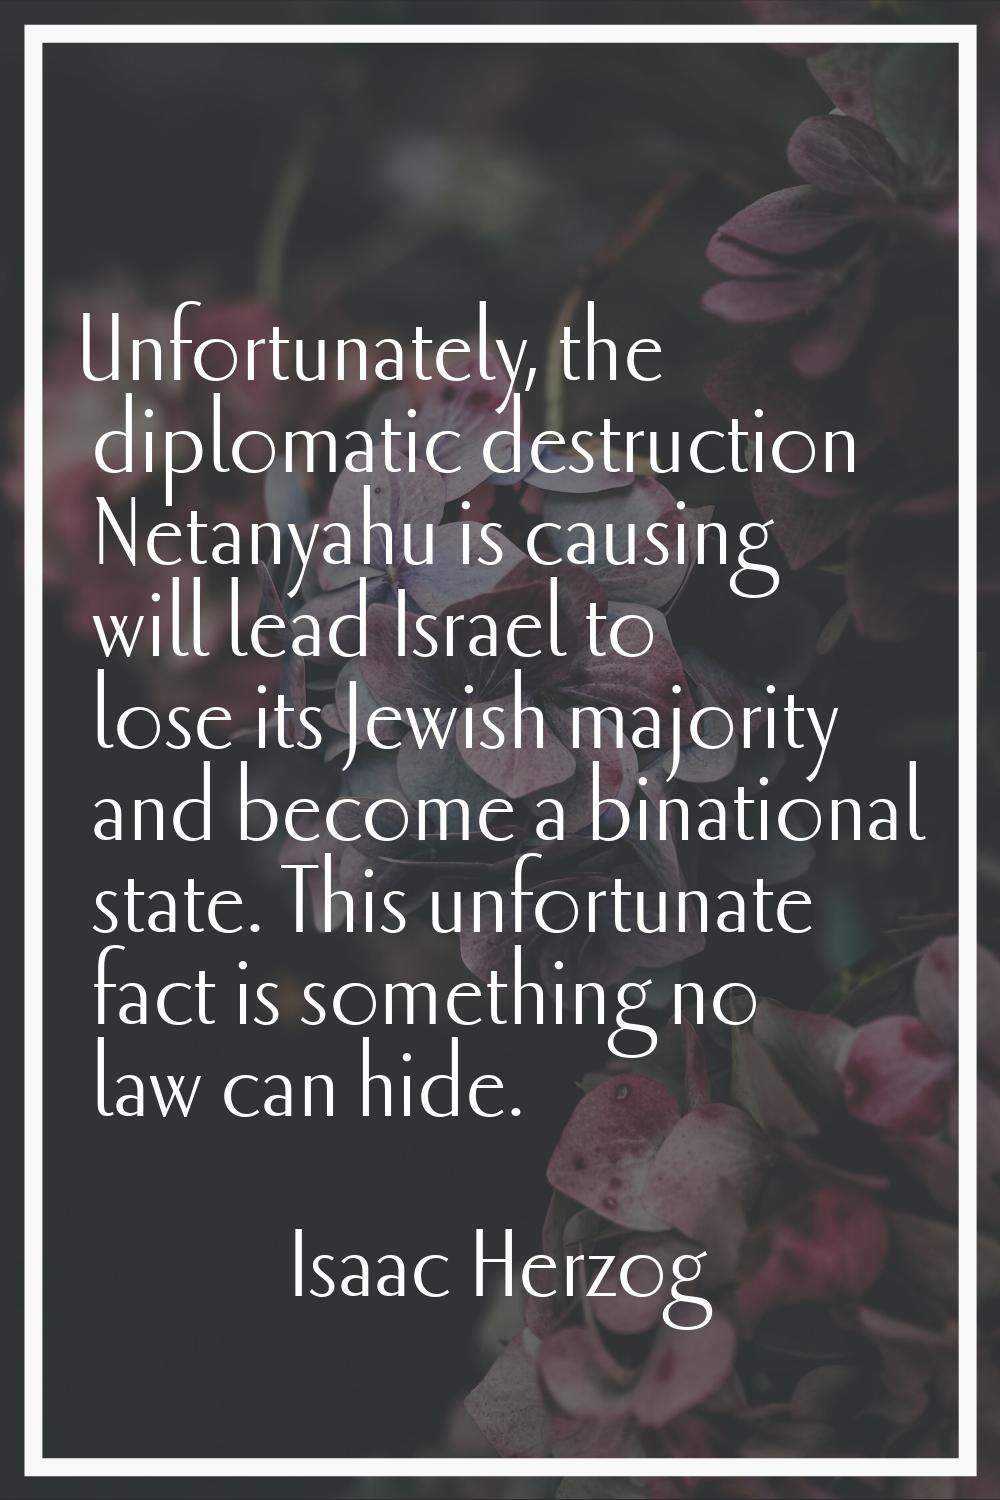 Unfortunately, the diplomatic destruction Netanyahu is causing will lead Israel to lose its Jewish 